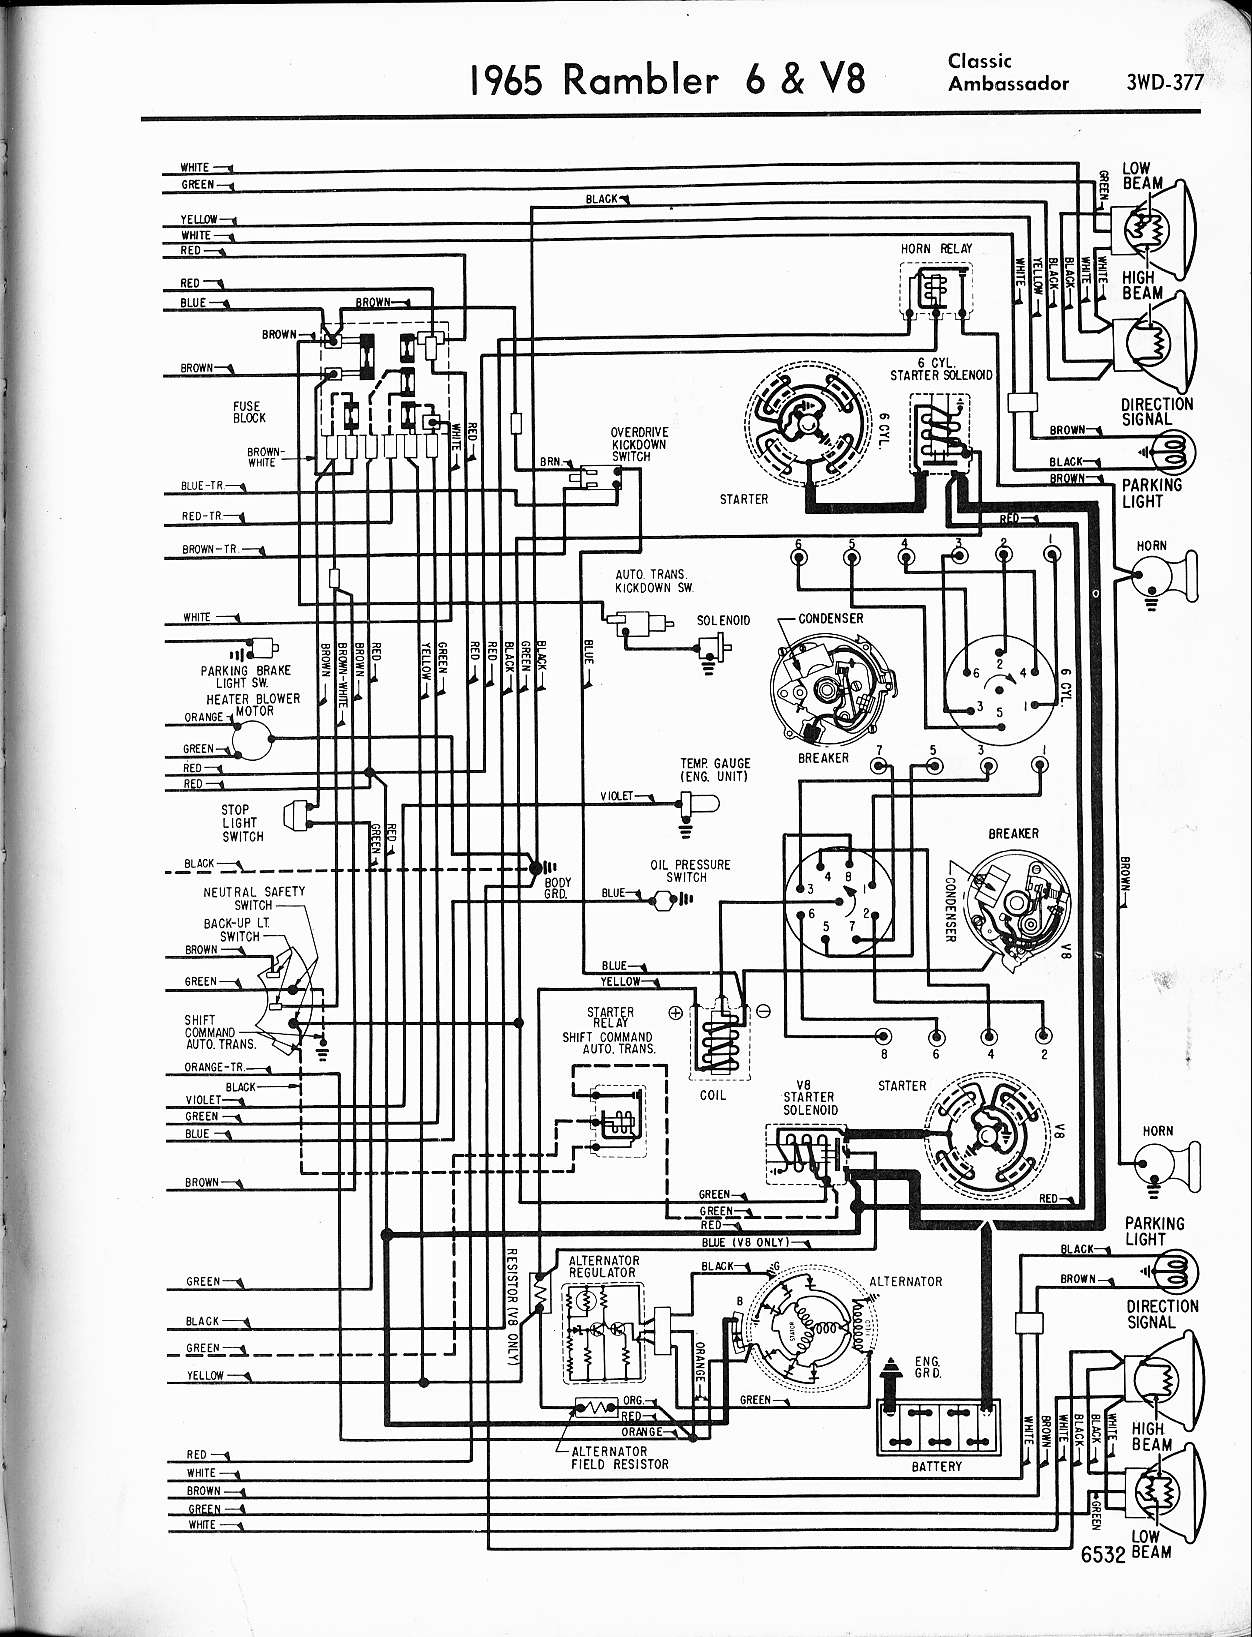 Back up light switch 65 Classic - The AMC Forum - Page 1